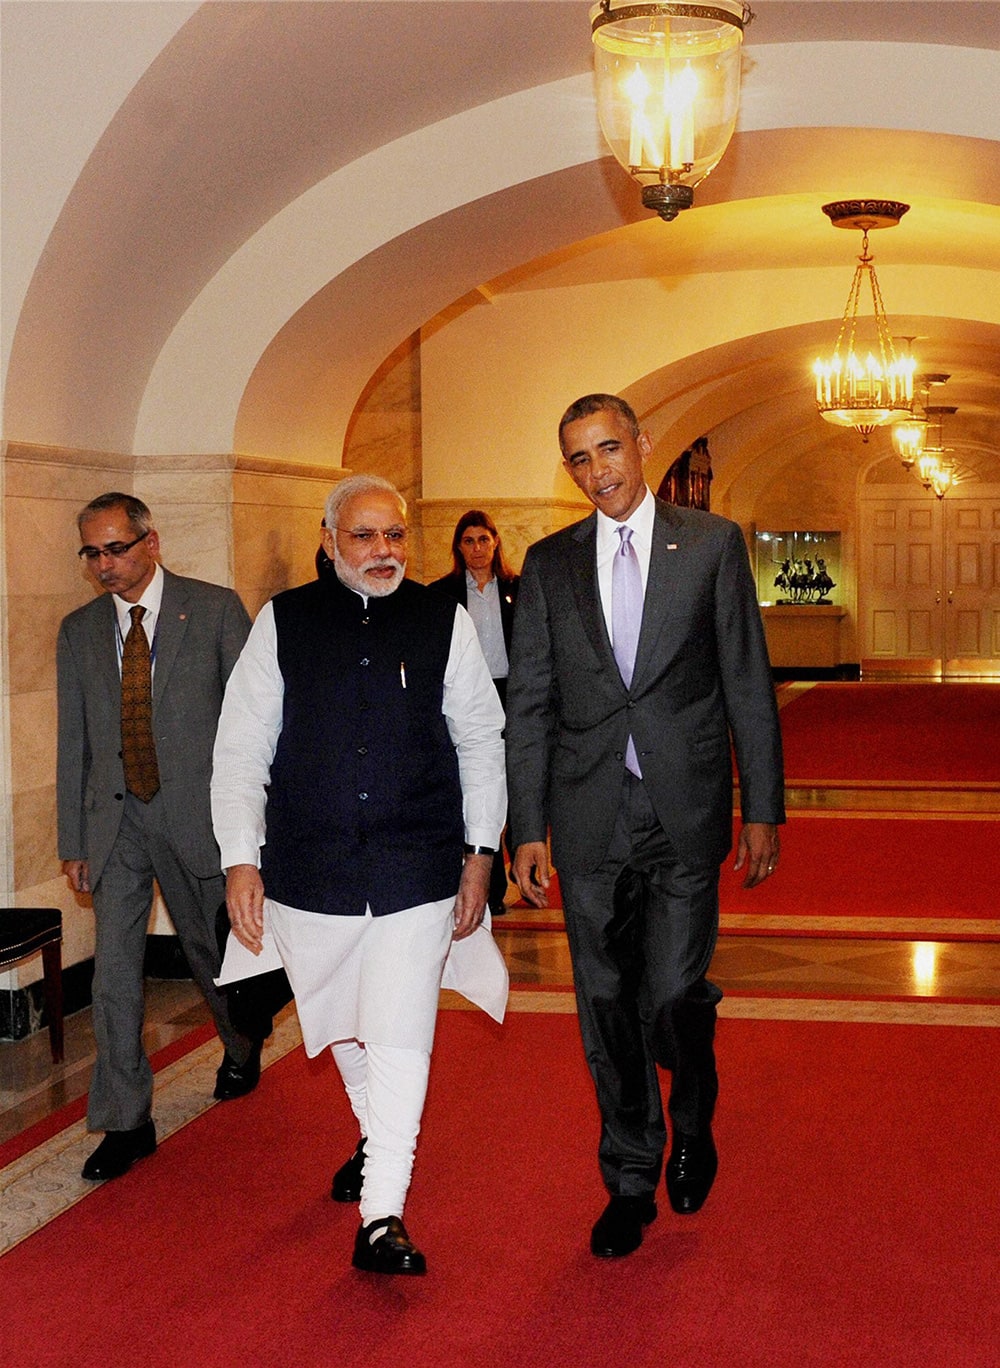 US President Barack Obama welcomes Indian Prime Minister Narendra Modi at the dinner hosted in his honour, at the White House, in Washington DC.